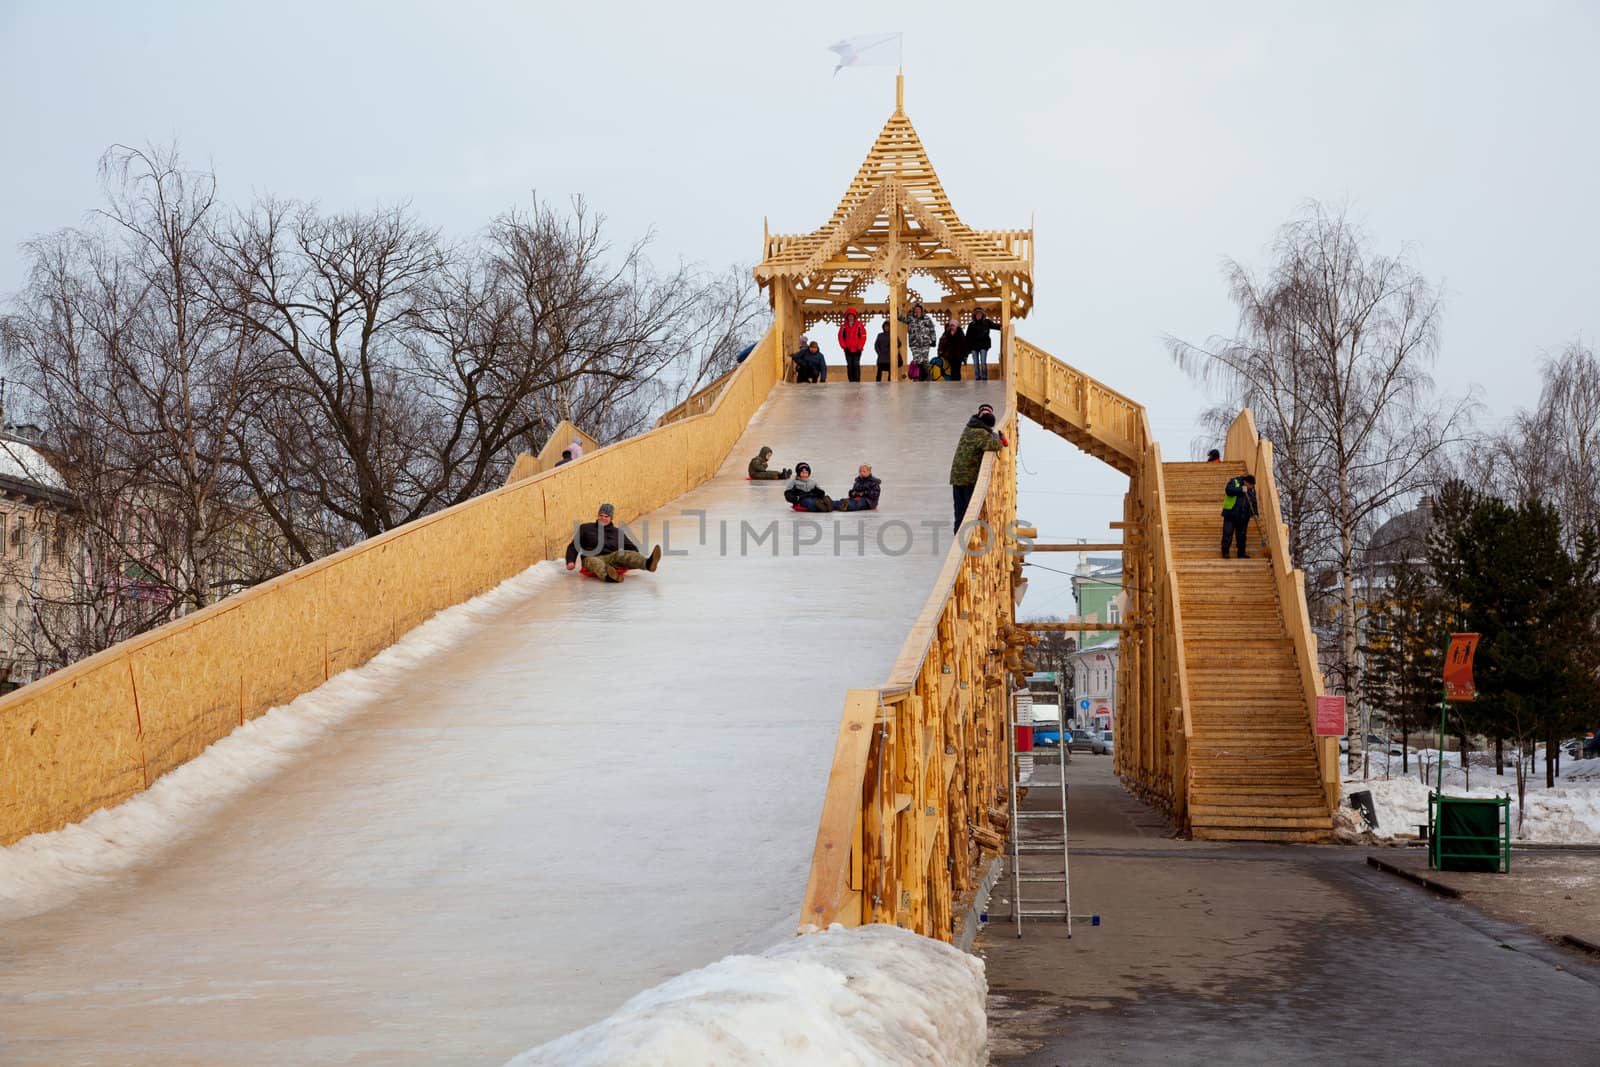 Construction-hill for skiing on ice. Winter. Russia. Vologda. Tradition. editorial